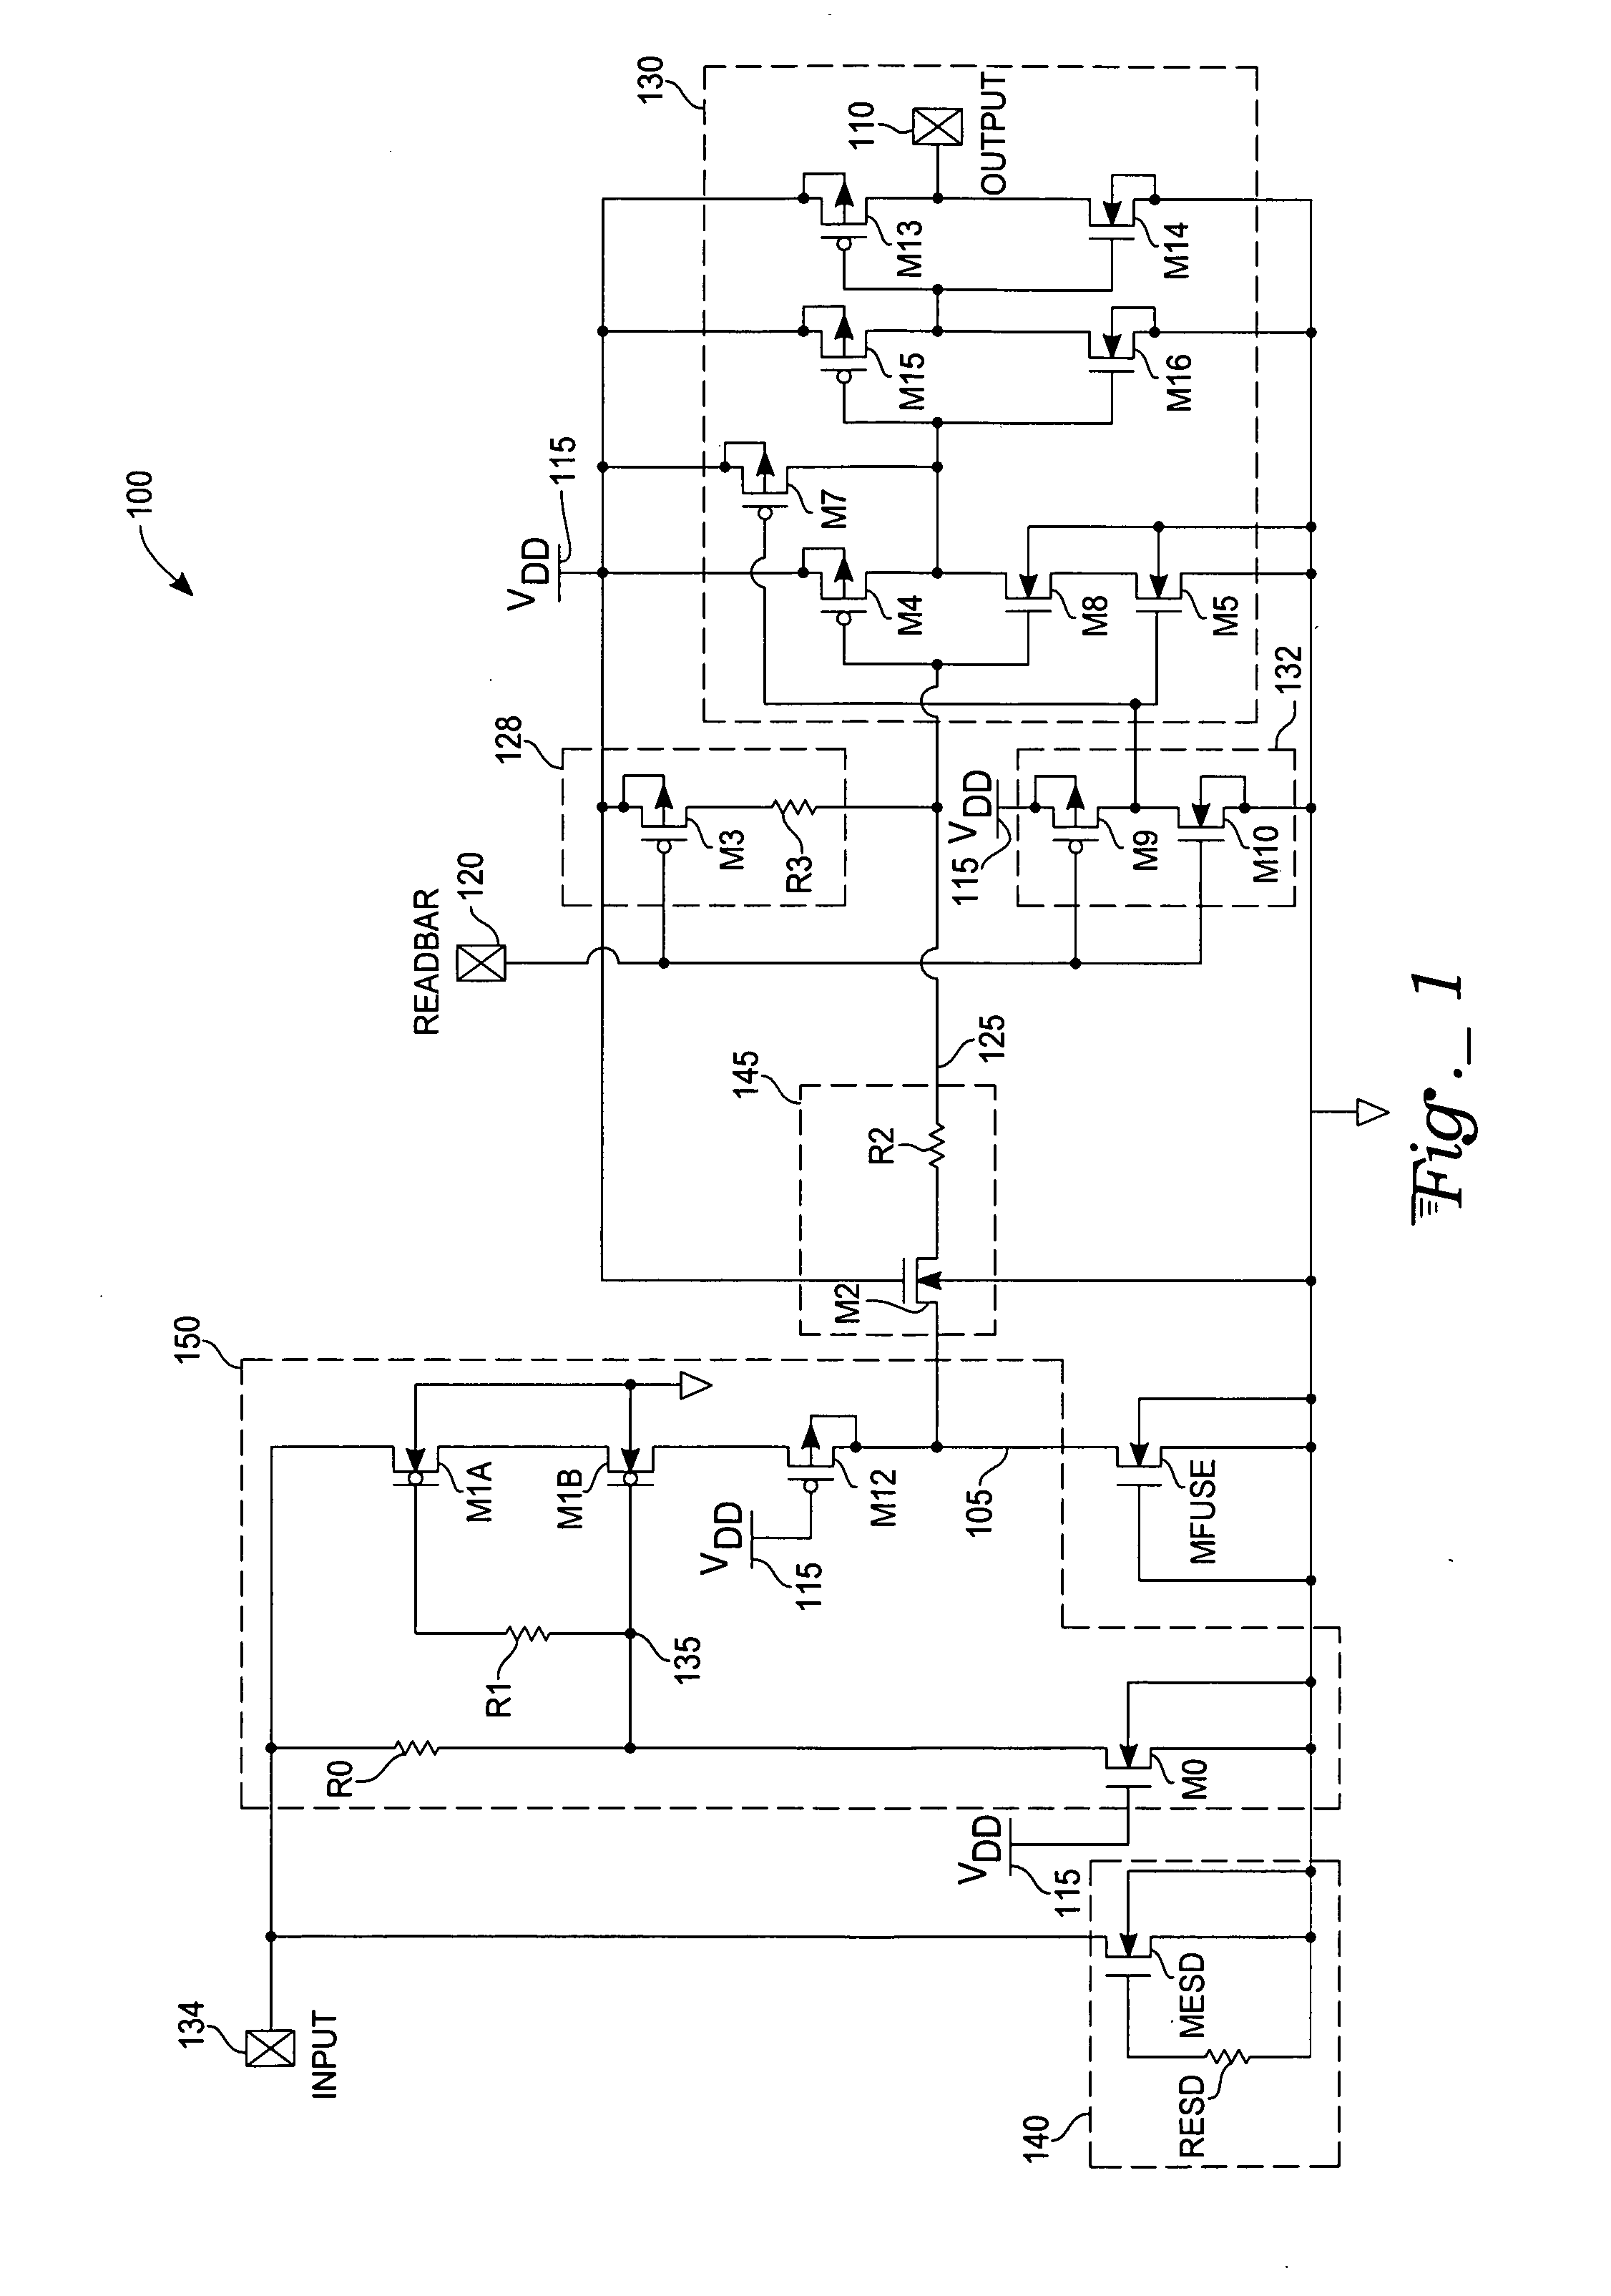 Antifuse programming, protection, and sensing device